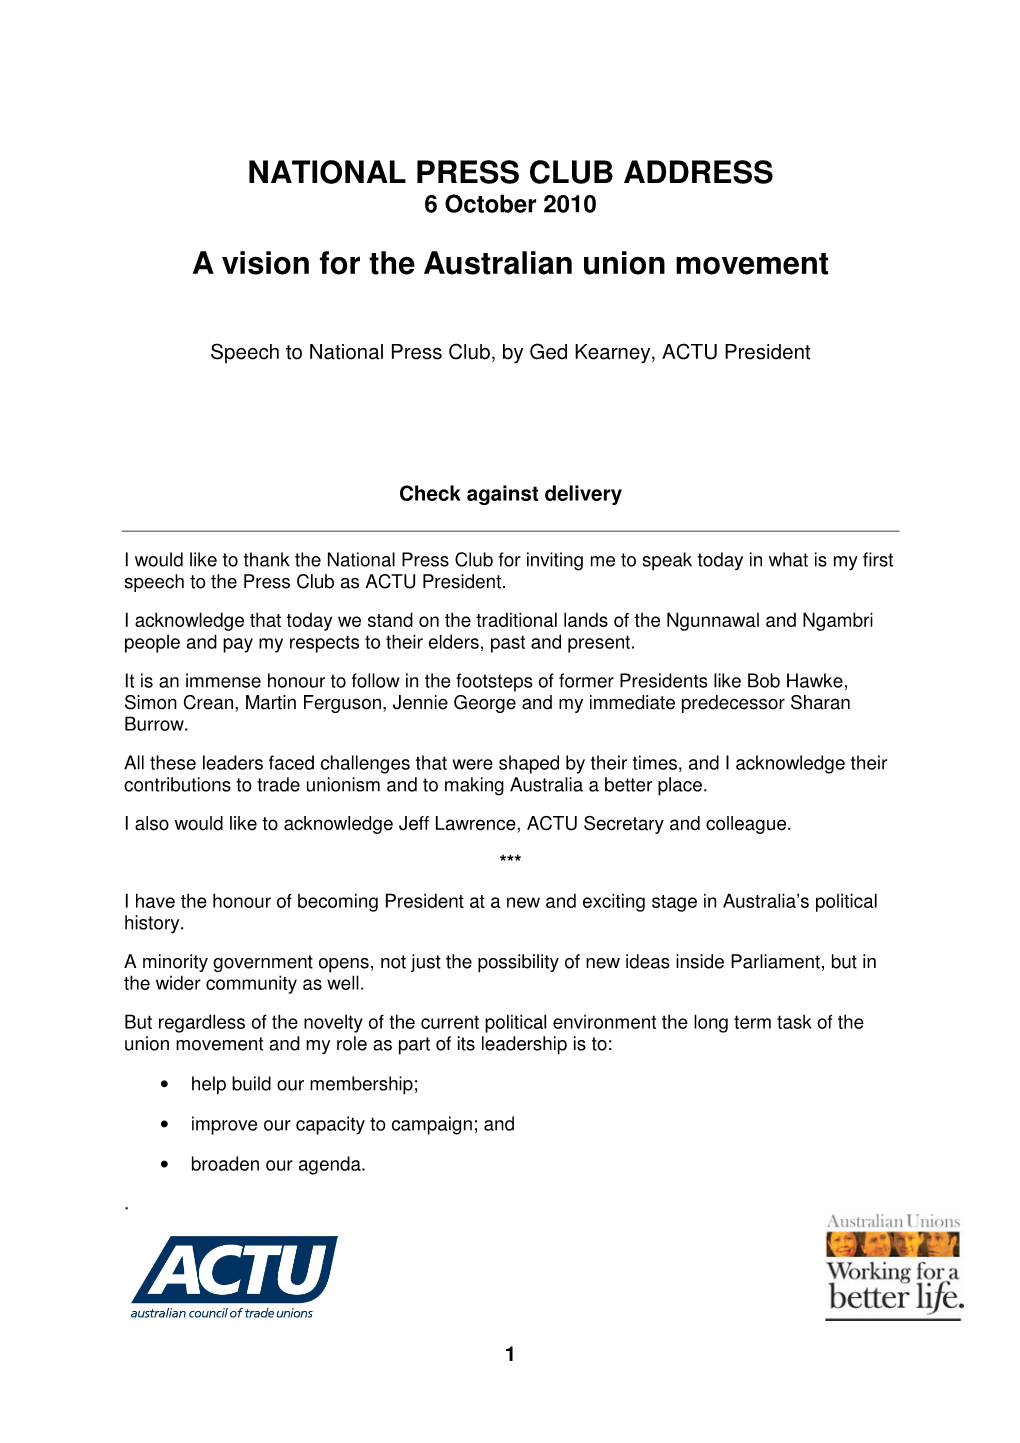 NATIONAL PRESS CLUB ADDRESS a Vision for the Australian Union Movement